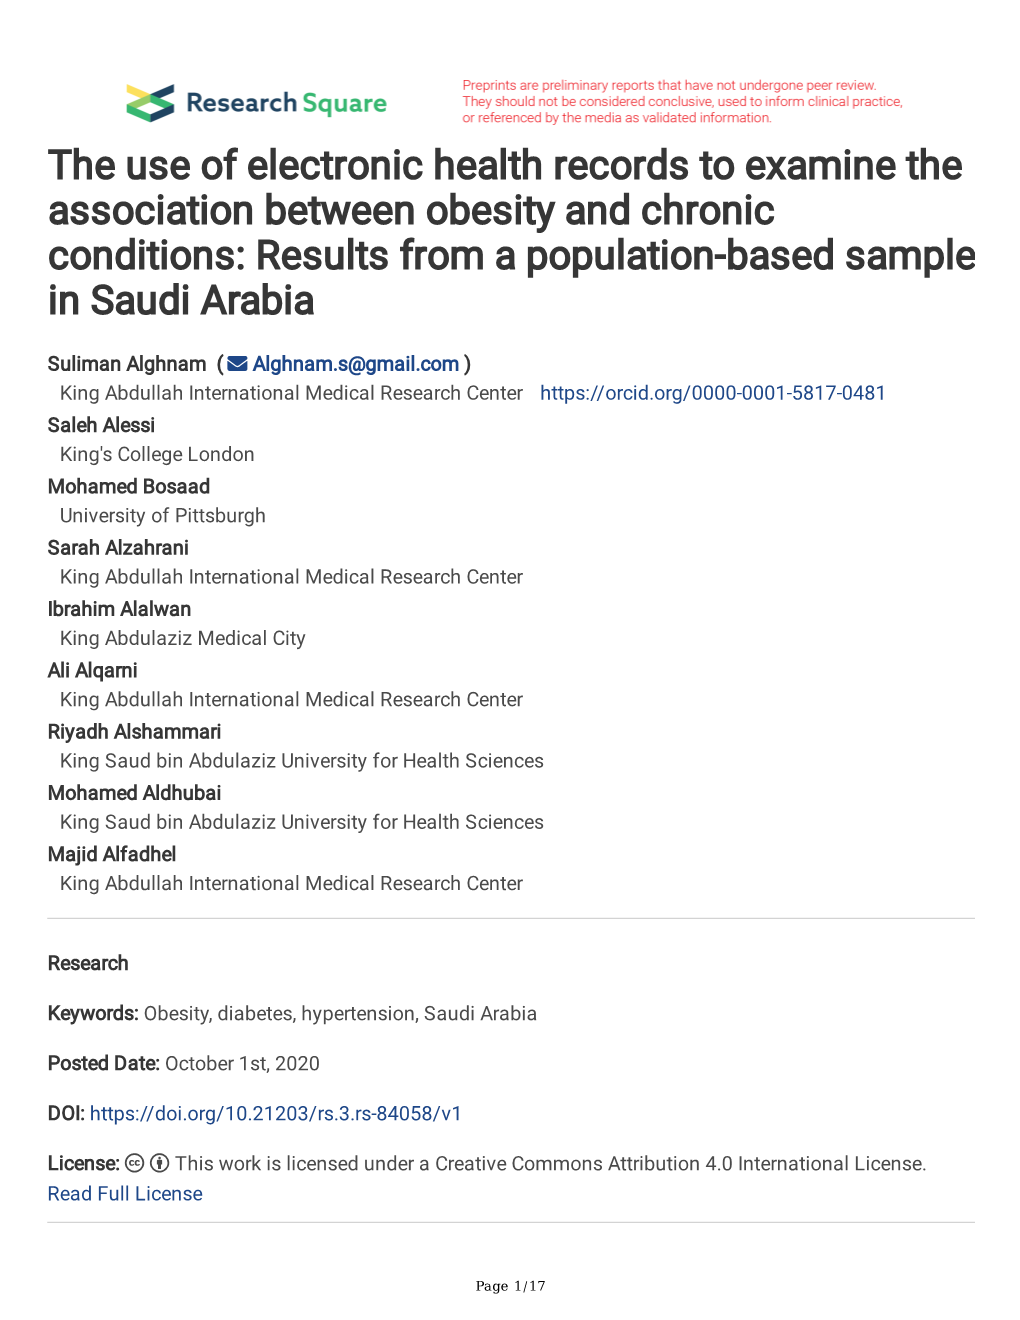 The Use of Electronic Health Records to Examine the Association Between Obesity and Chronic Conditions: Results from a Population-Based Sample in Saudi Arabia